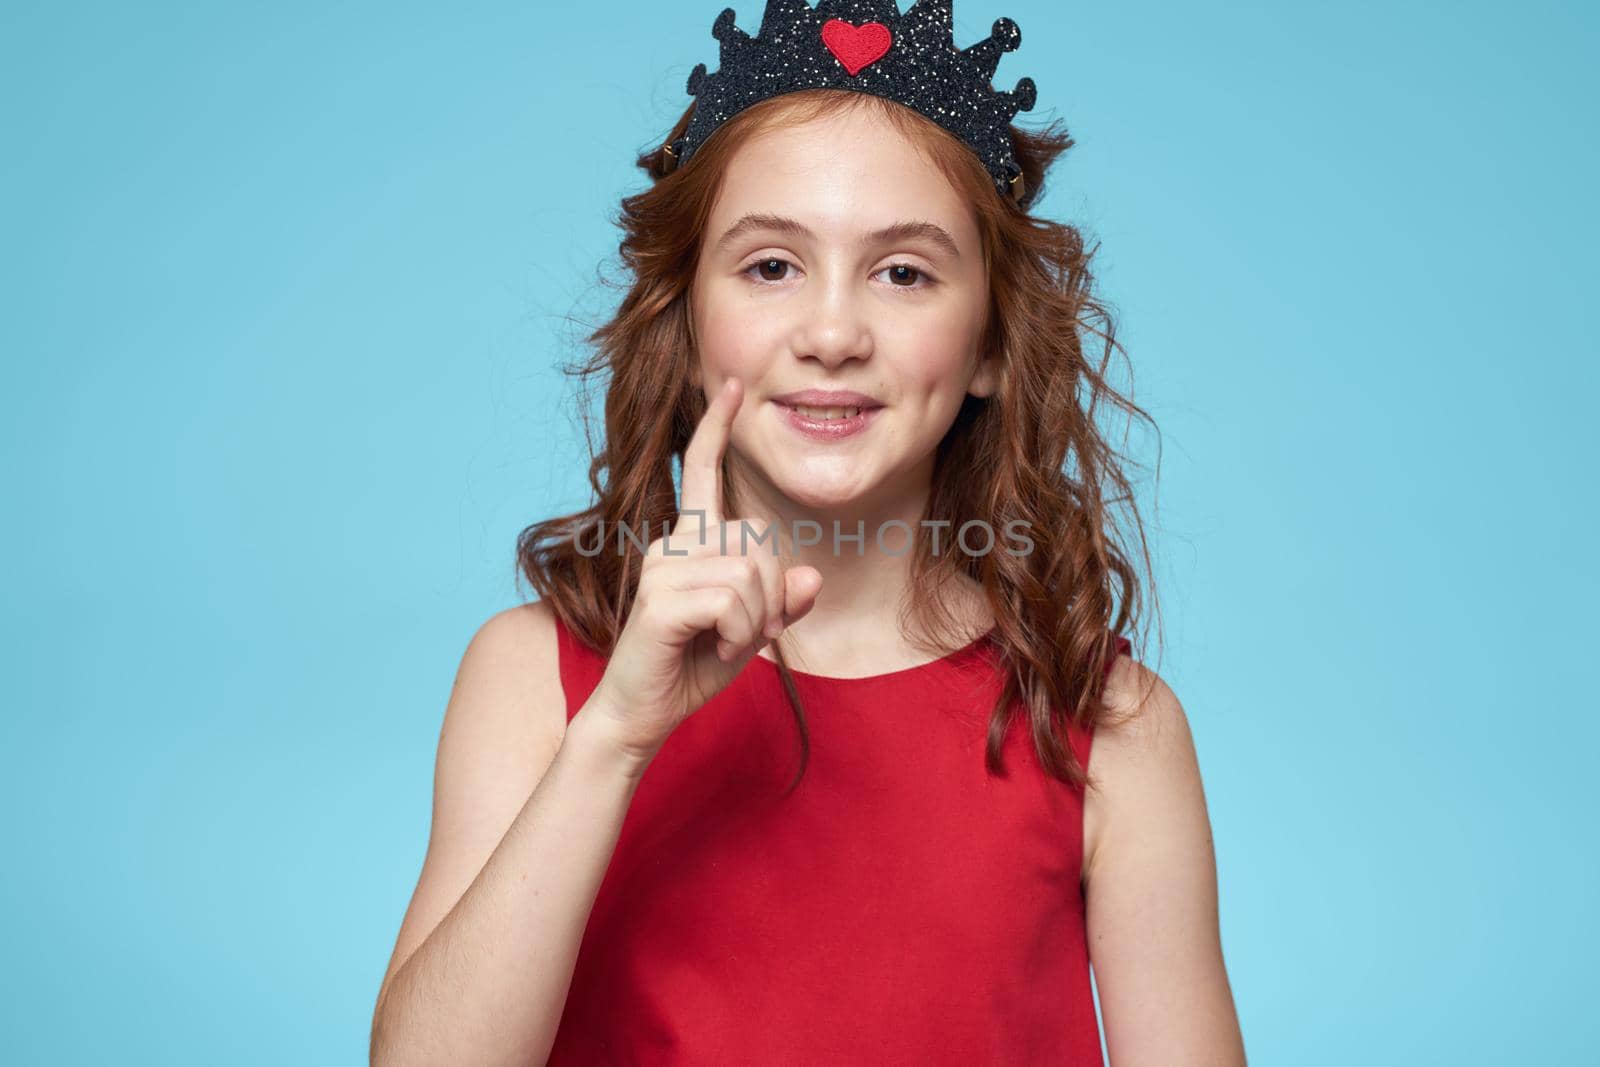 Girl in red dress with curly hair fun lifestyle blue background. High quality photo